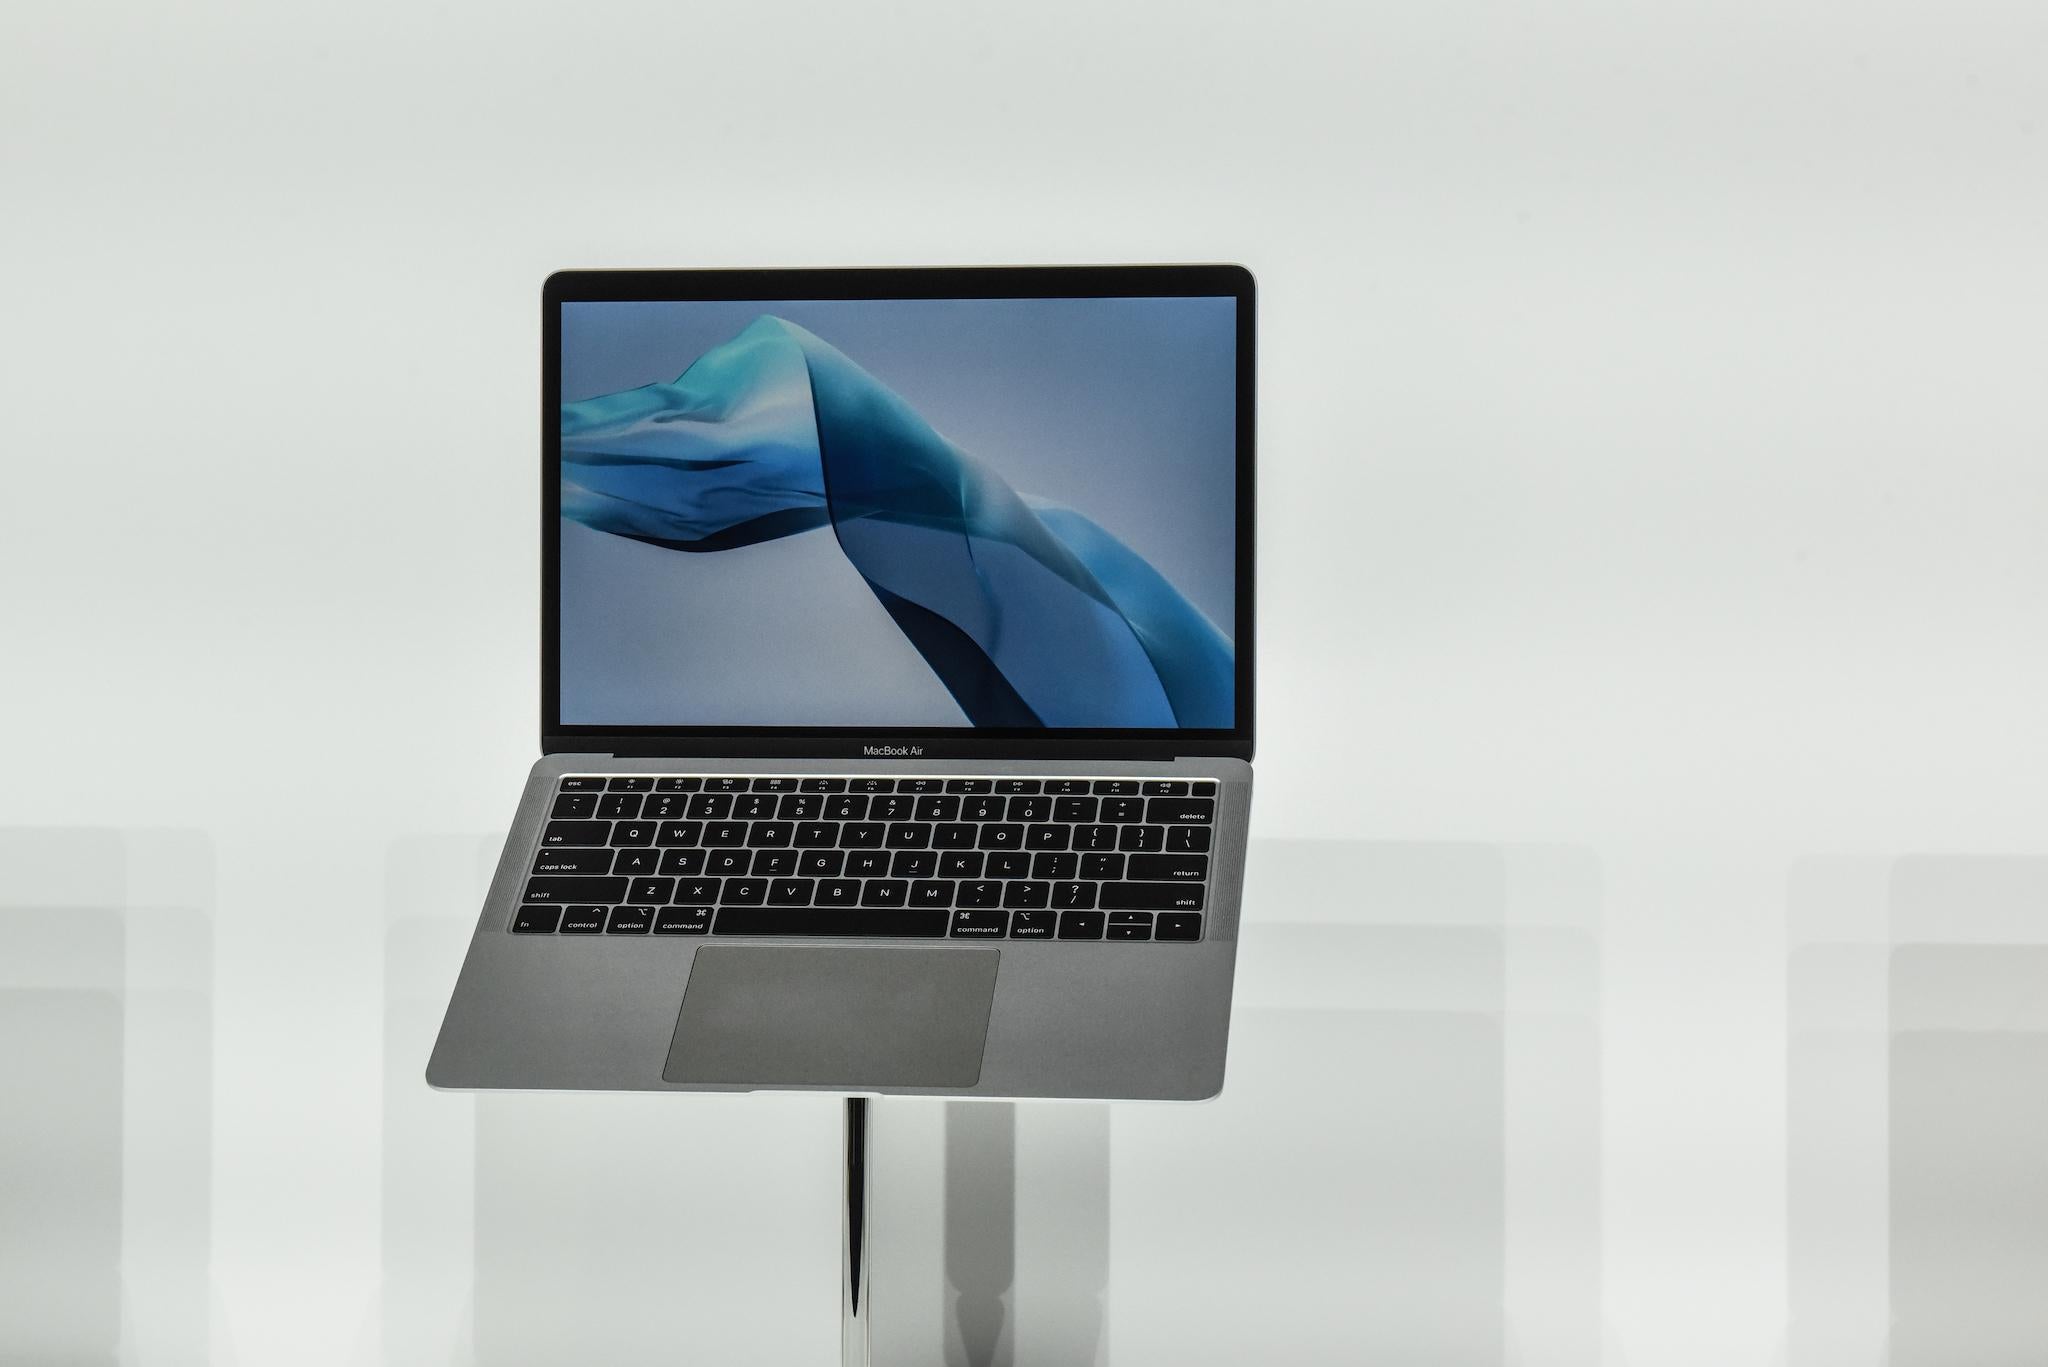 Apple unveils a new MacBook Air during an Apple launch event at the Brooklyn Academy of Music on October 30, 2018 in New York City